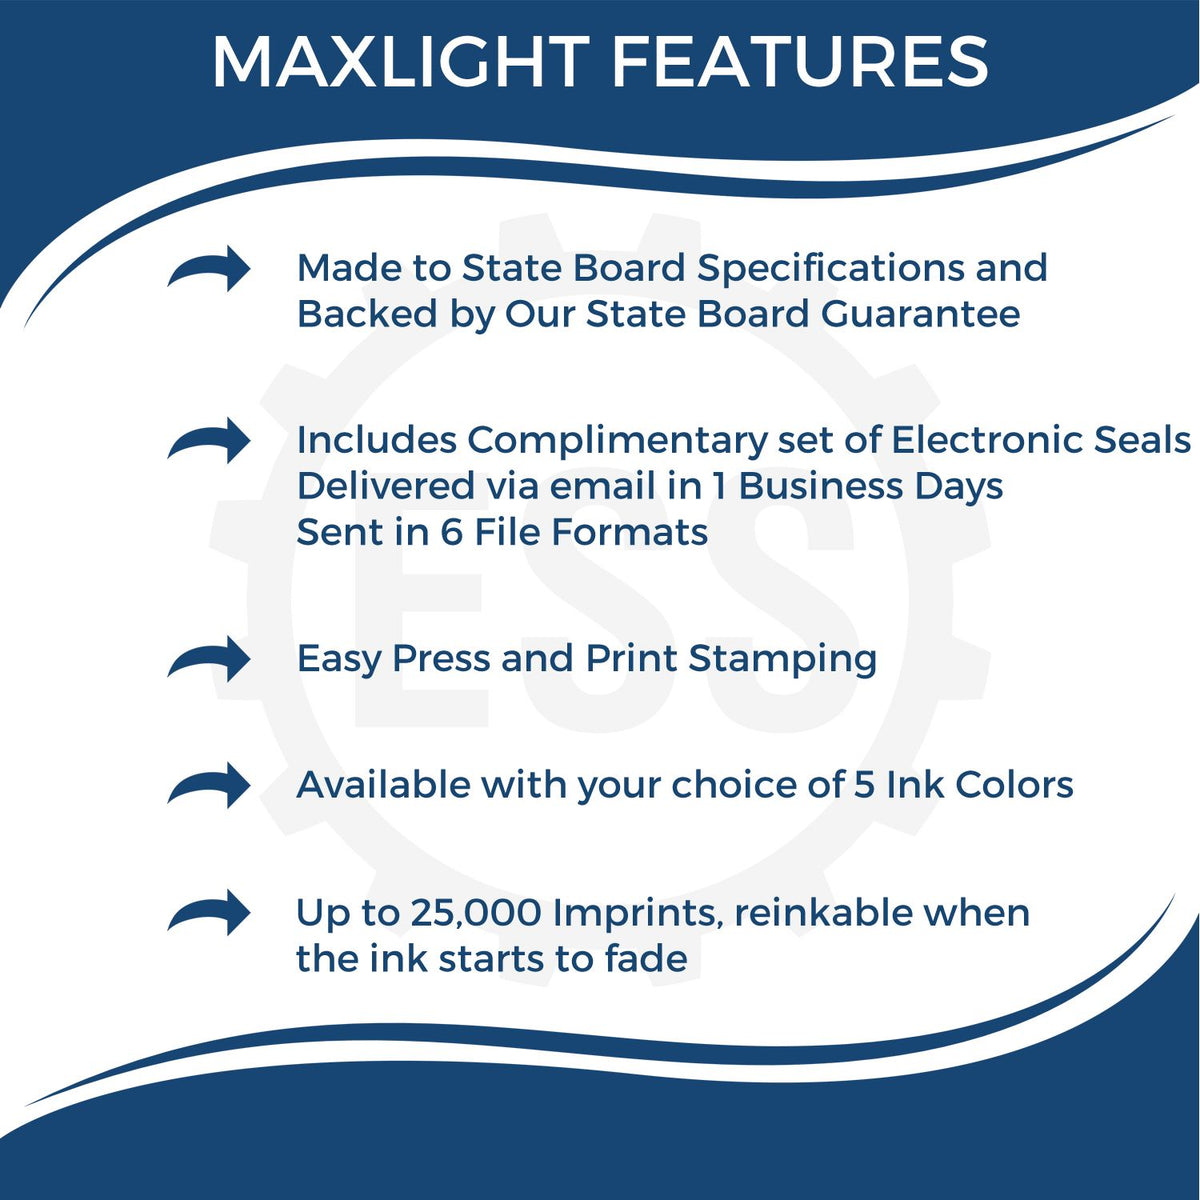 A picture of an infographic highlighting the selling points for the Premium MaxLight Pre-Inked Idaho Engineering Stamp